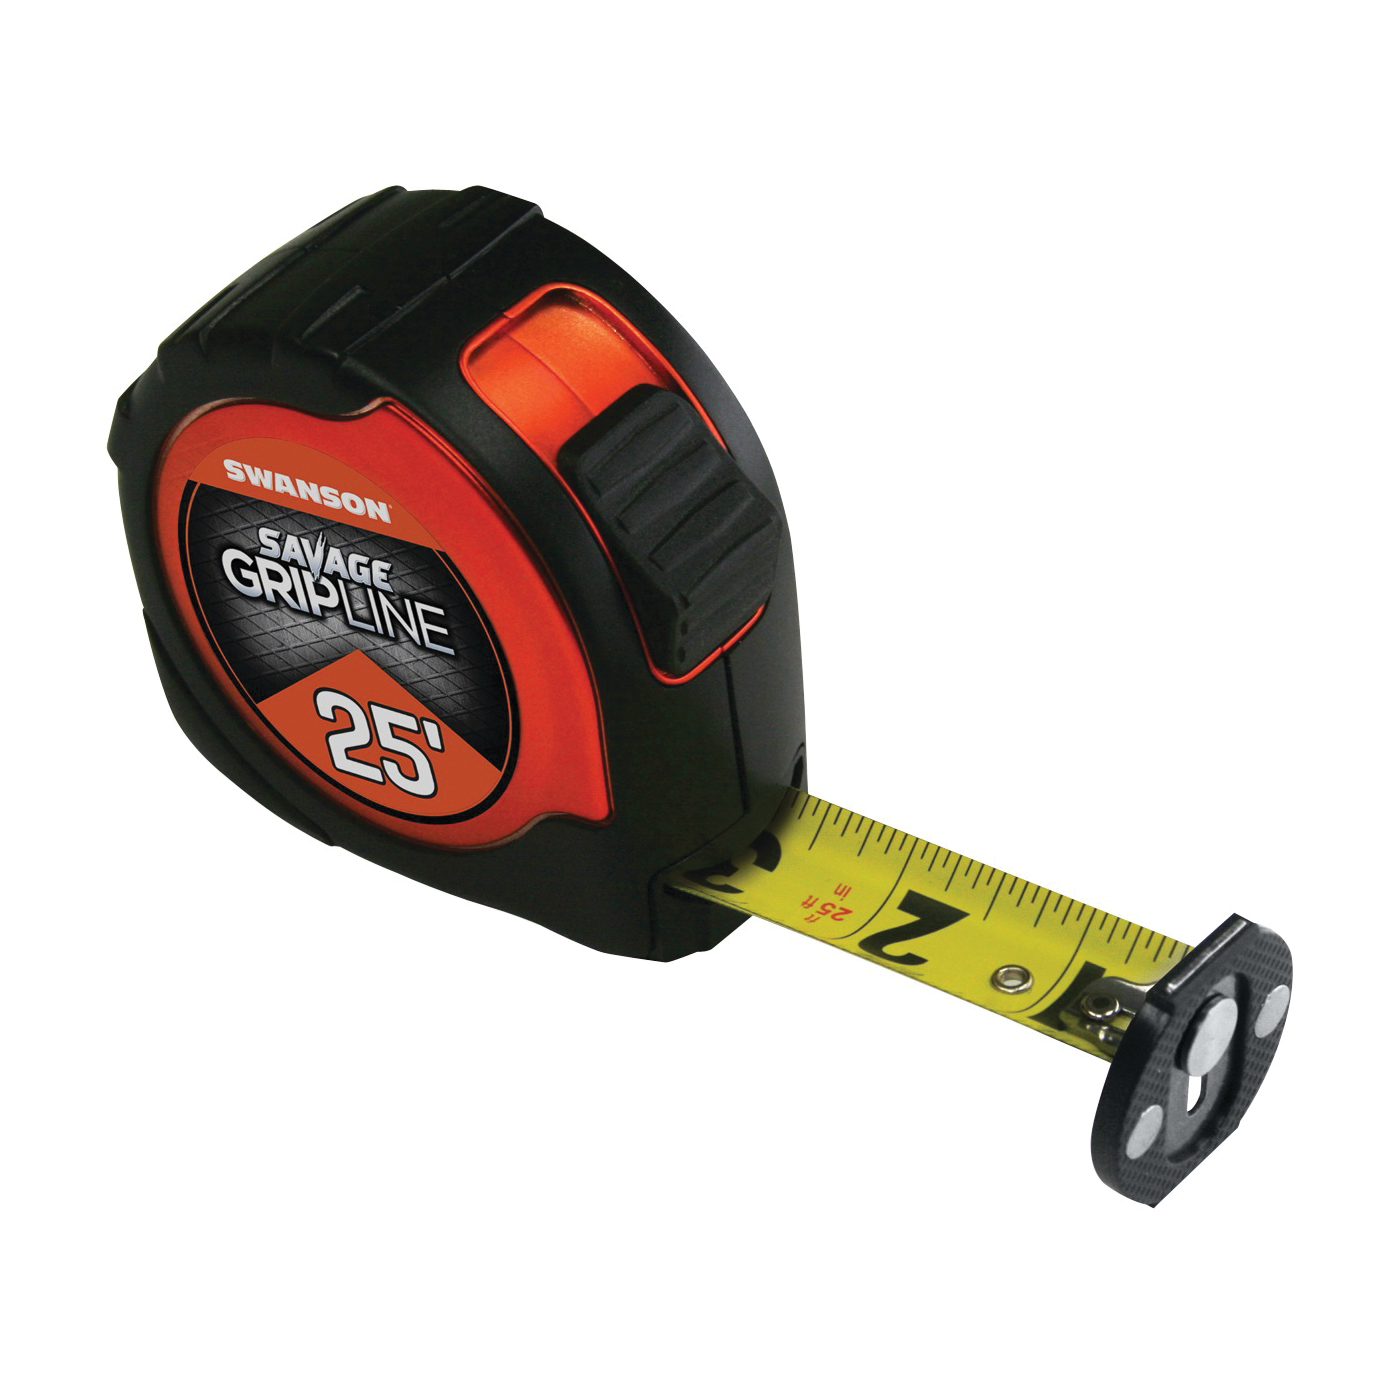 SAVAGE Series SVGL25M1 Tape Measure, 25 ft L Blade, 1-1/16 in W Blade, ABS/Rubber Case